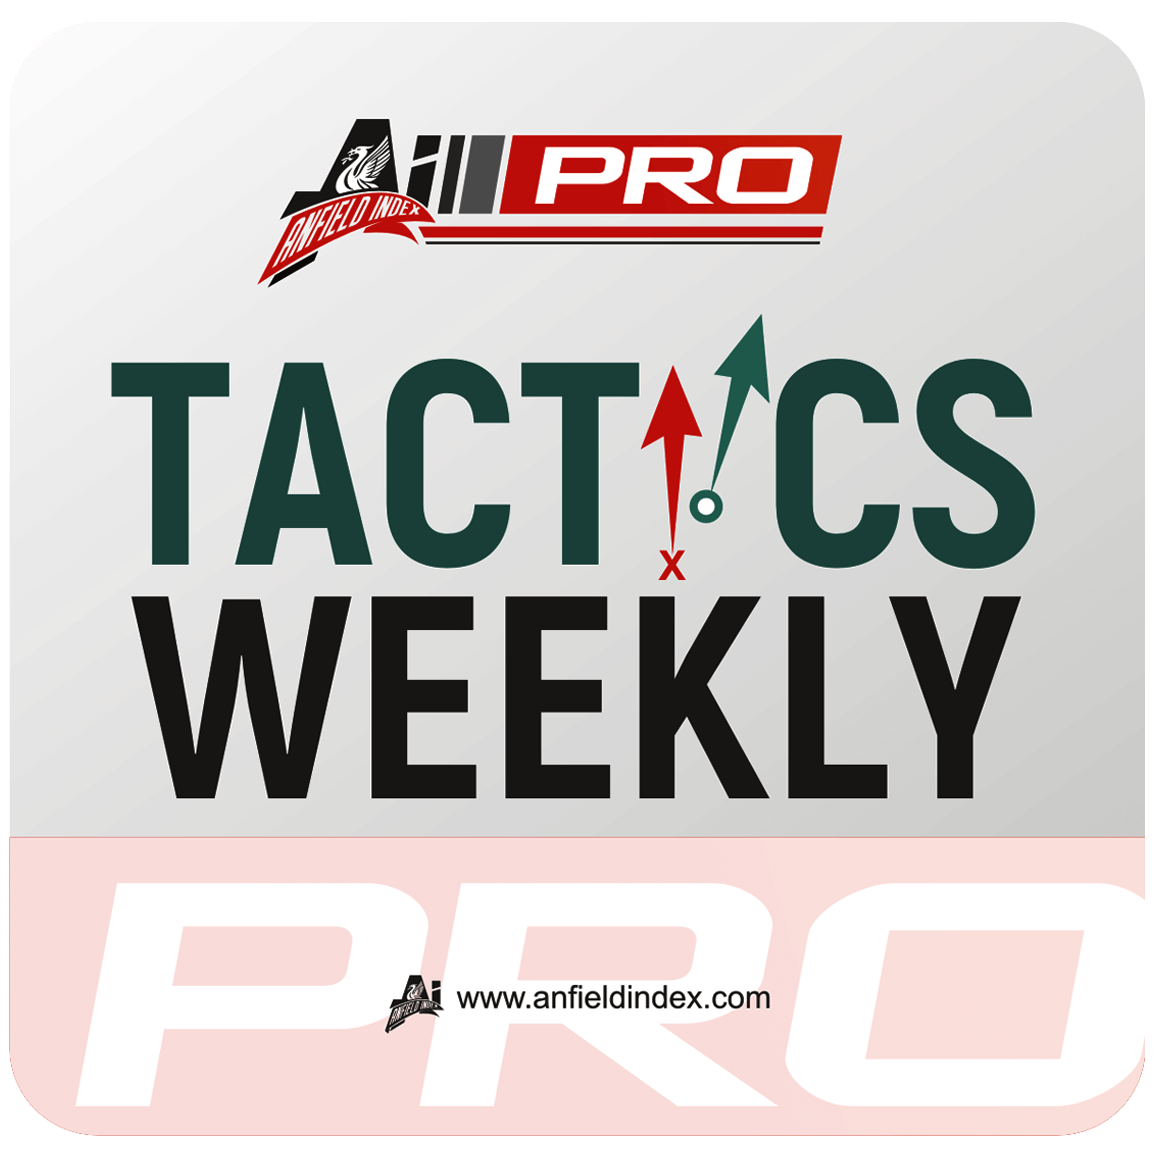 Tactics Weekly: Liverpool's Two Victories Analysed - With Very Different Tactical Performances!